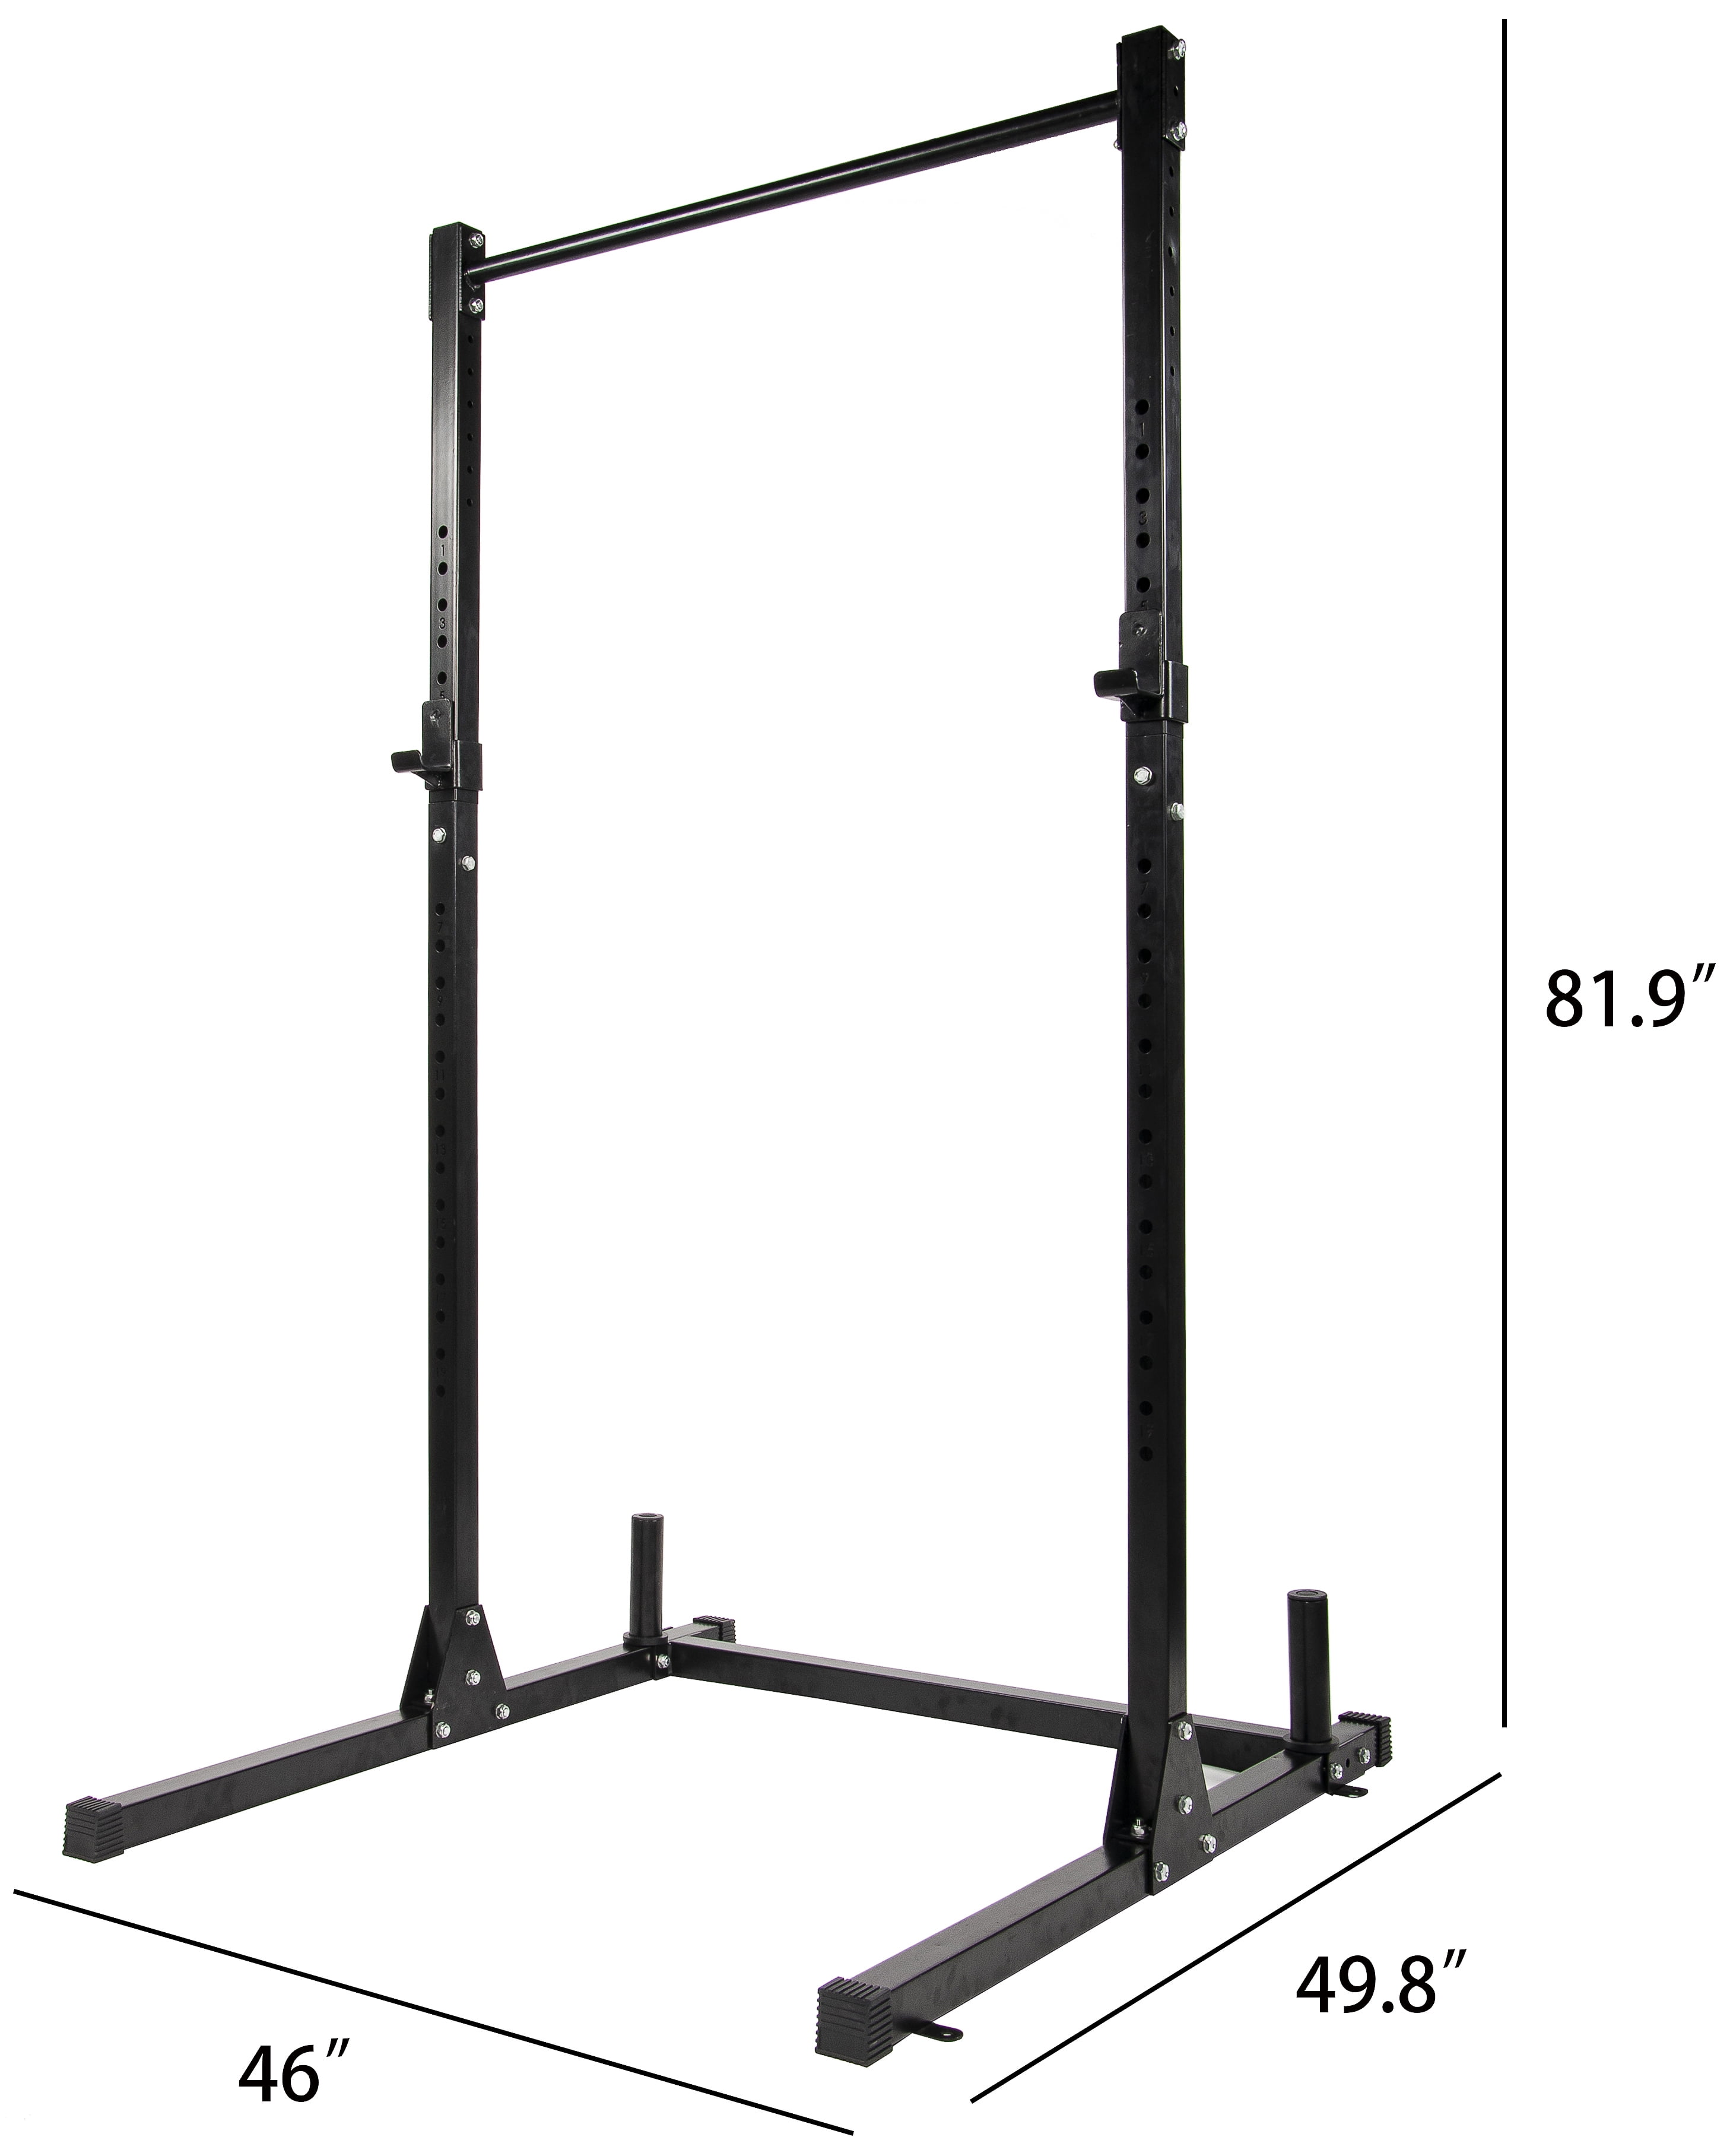 BalanceFrom Multi-Function Adjustable Power Rack Exercise Squat Stand with J-Hooks and Other Accessories, 500-Pound Capacity - black